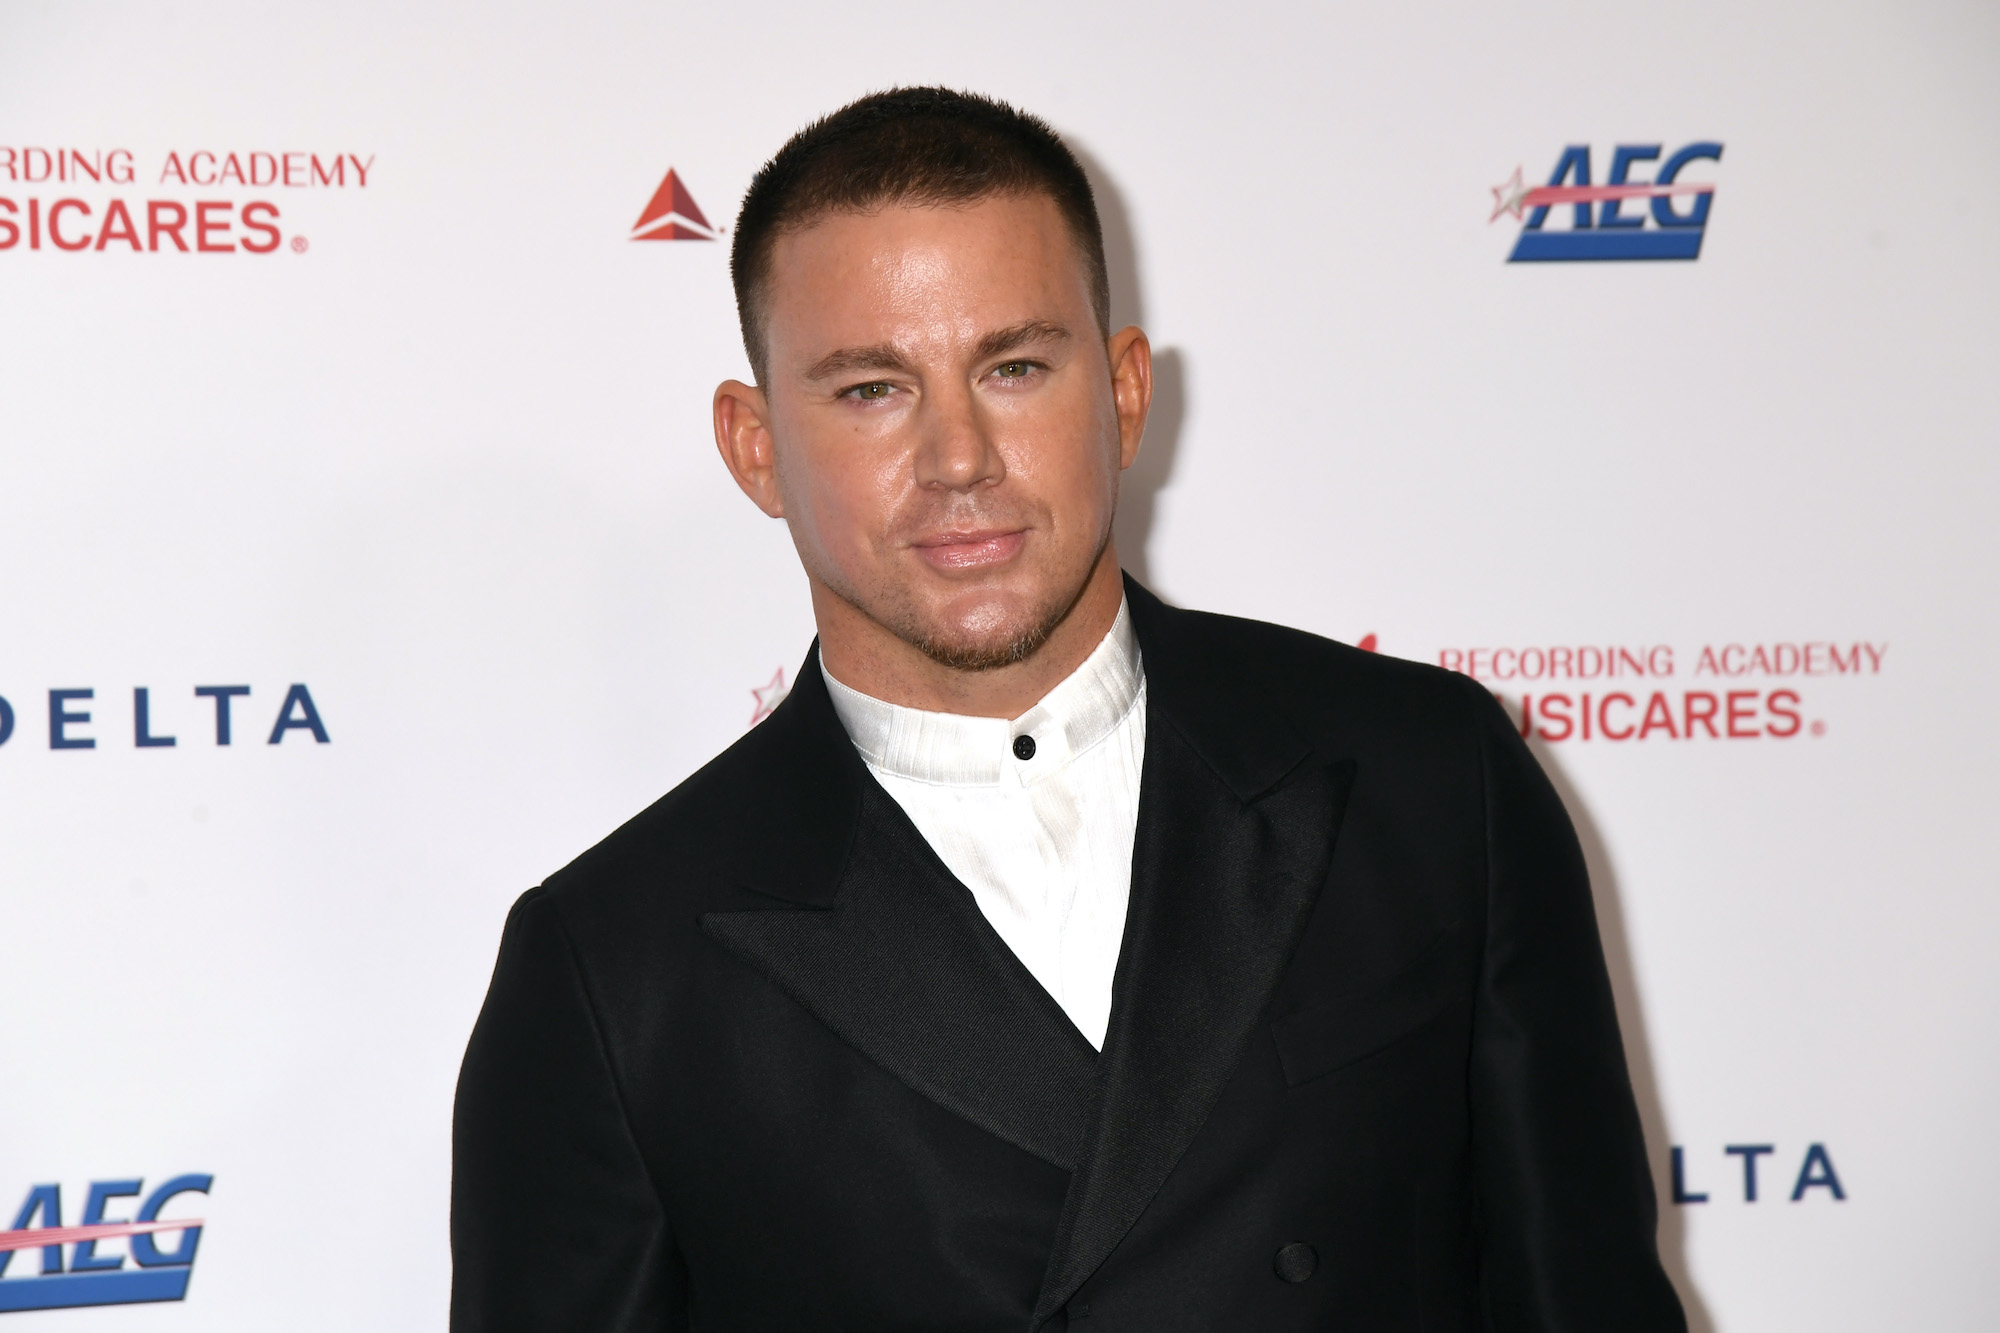 Channing Tatum Says the Appeal of a Multi-Picture Deal Forced Him into ‘GI Joe: The Rise of the Cobra’: ‘I F*cking Hate That Movie’